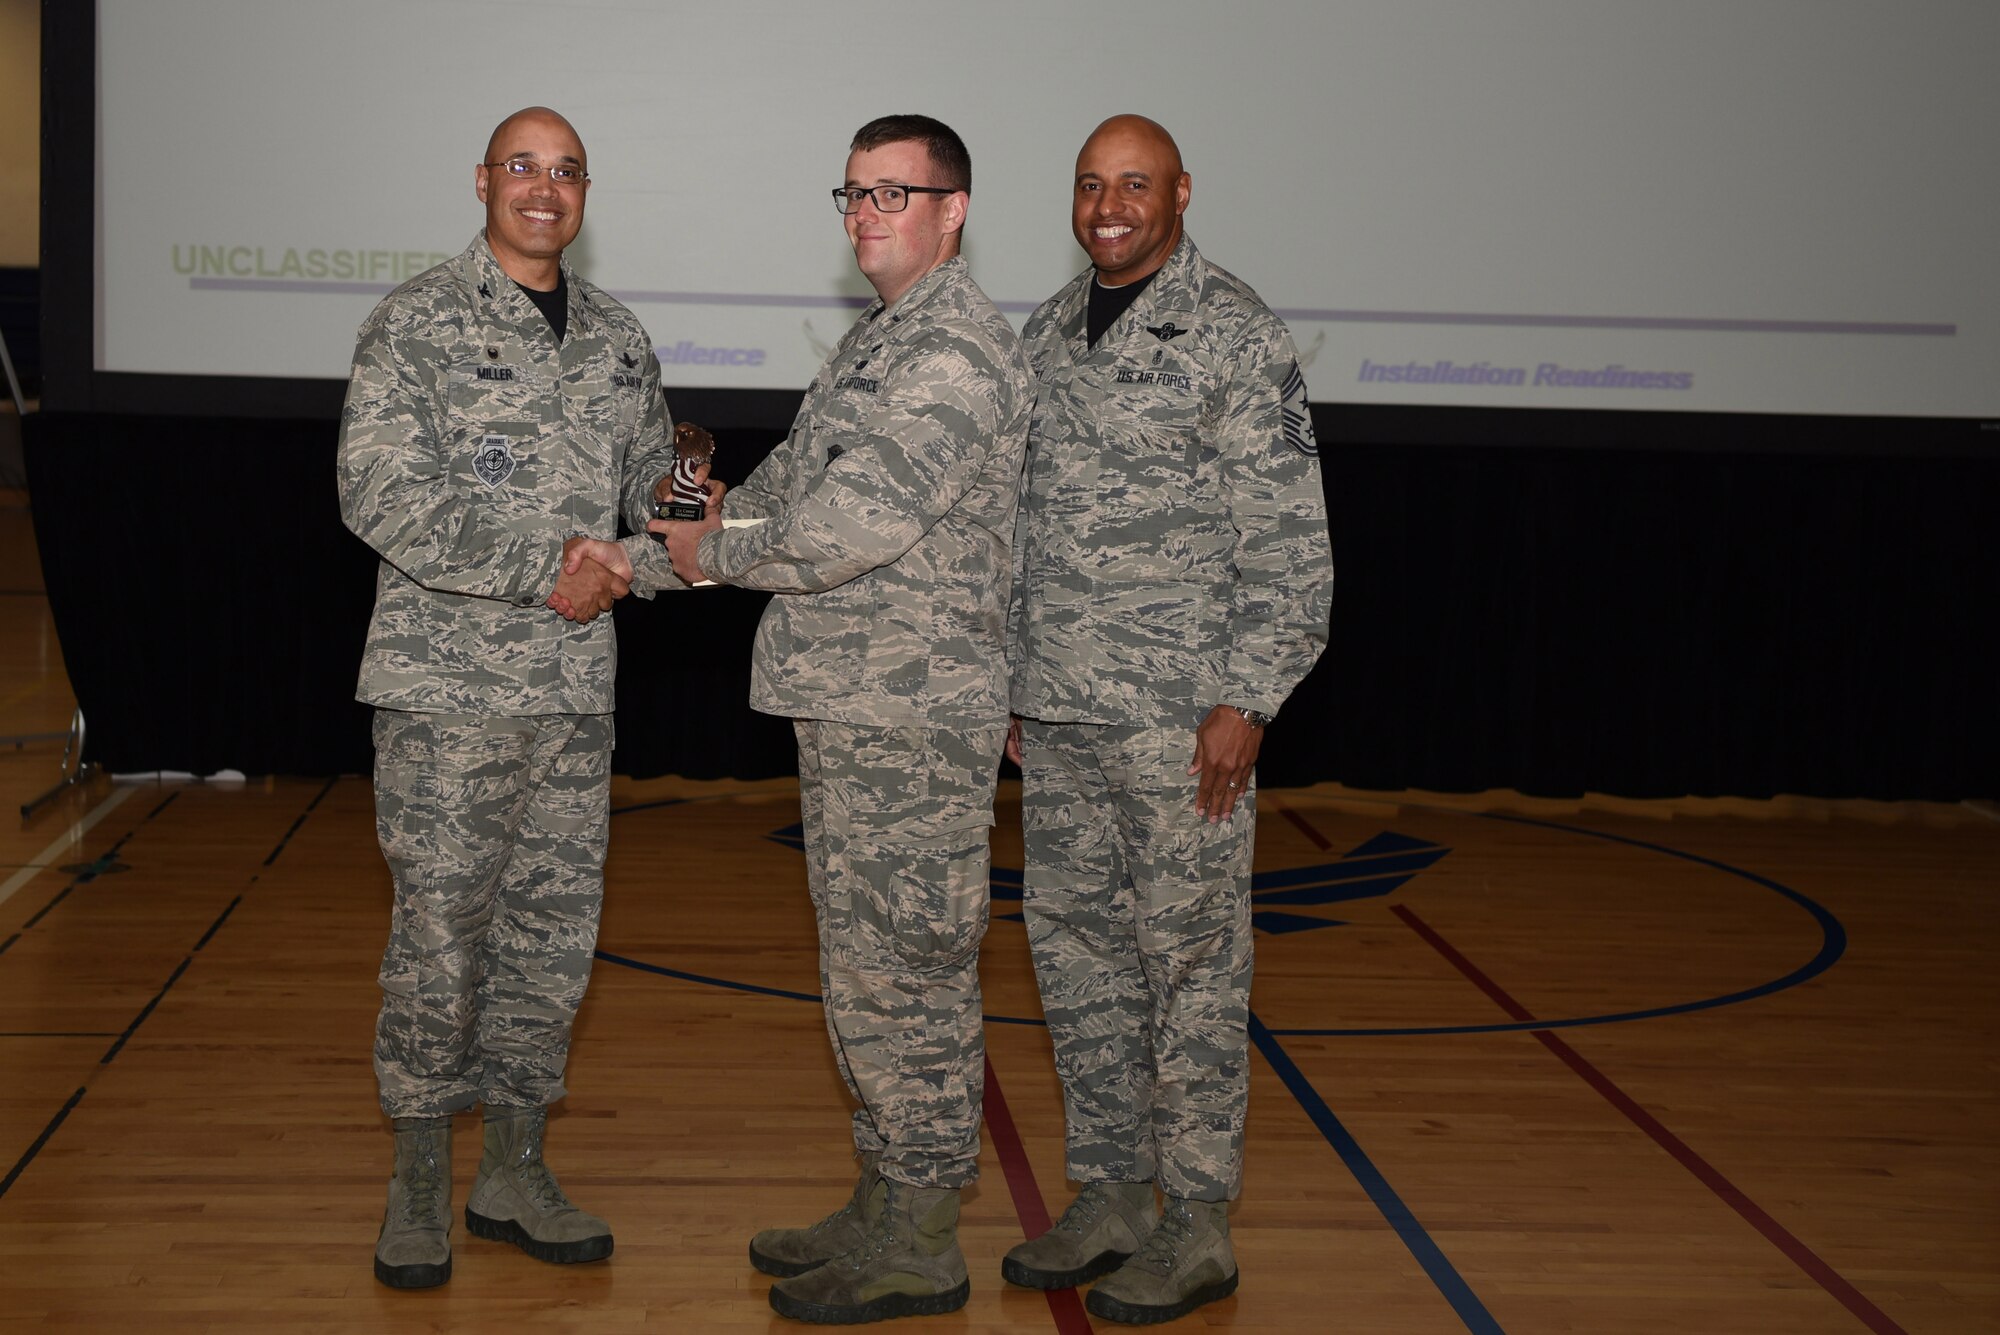 1st Lt. Conor Melanson, 460th Security Forces Squadron operations officer, receives the Company Grade Officer of the Quarter Award May 19, 2017, on Buckley Air Force Base, Colo.  Awards were given to the Team Buckley members who showed dedication, hard work and exceeded their supervisor’s expectations. (U.S. Air Force photo by Airman 1st Class Holden S. Faul/ released)